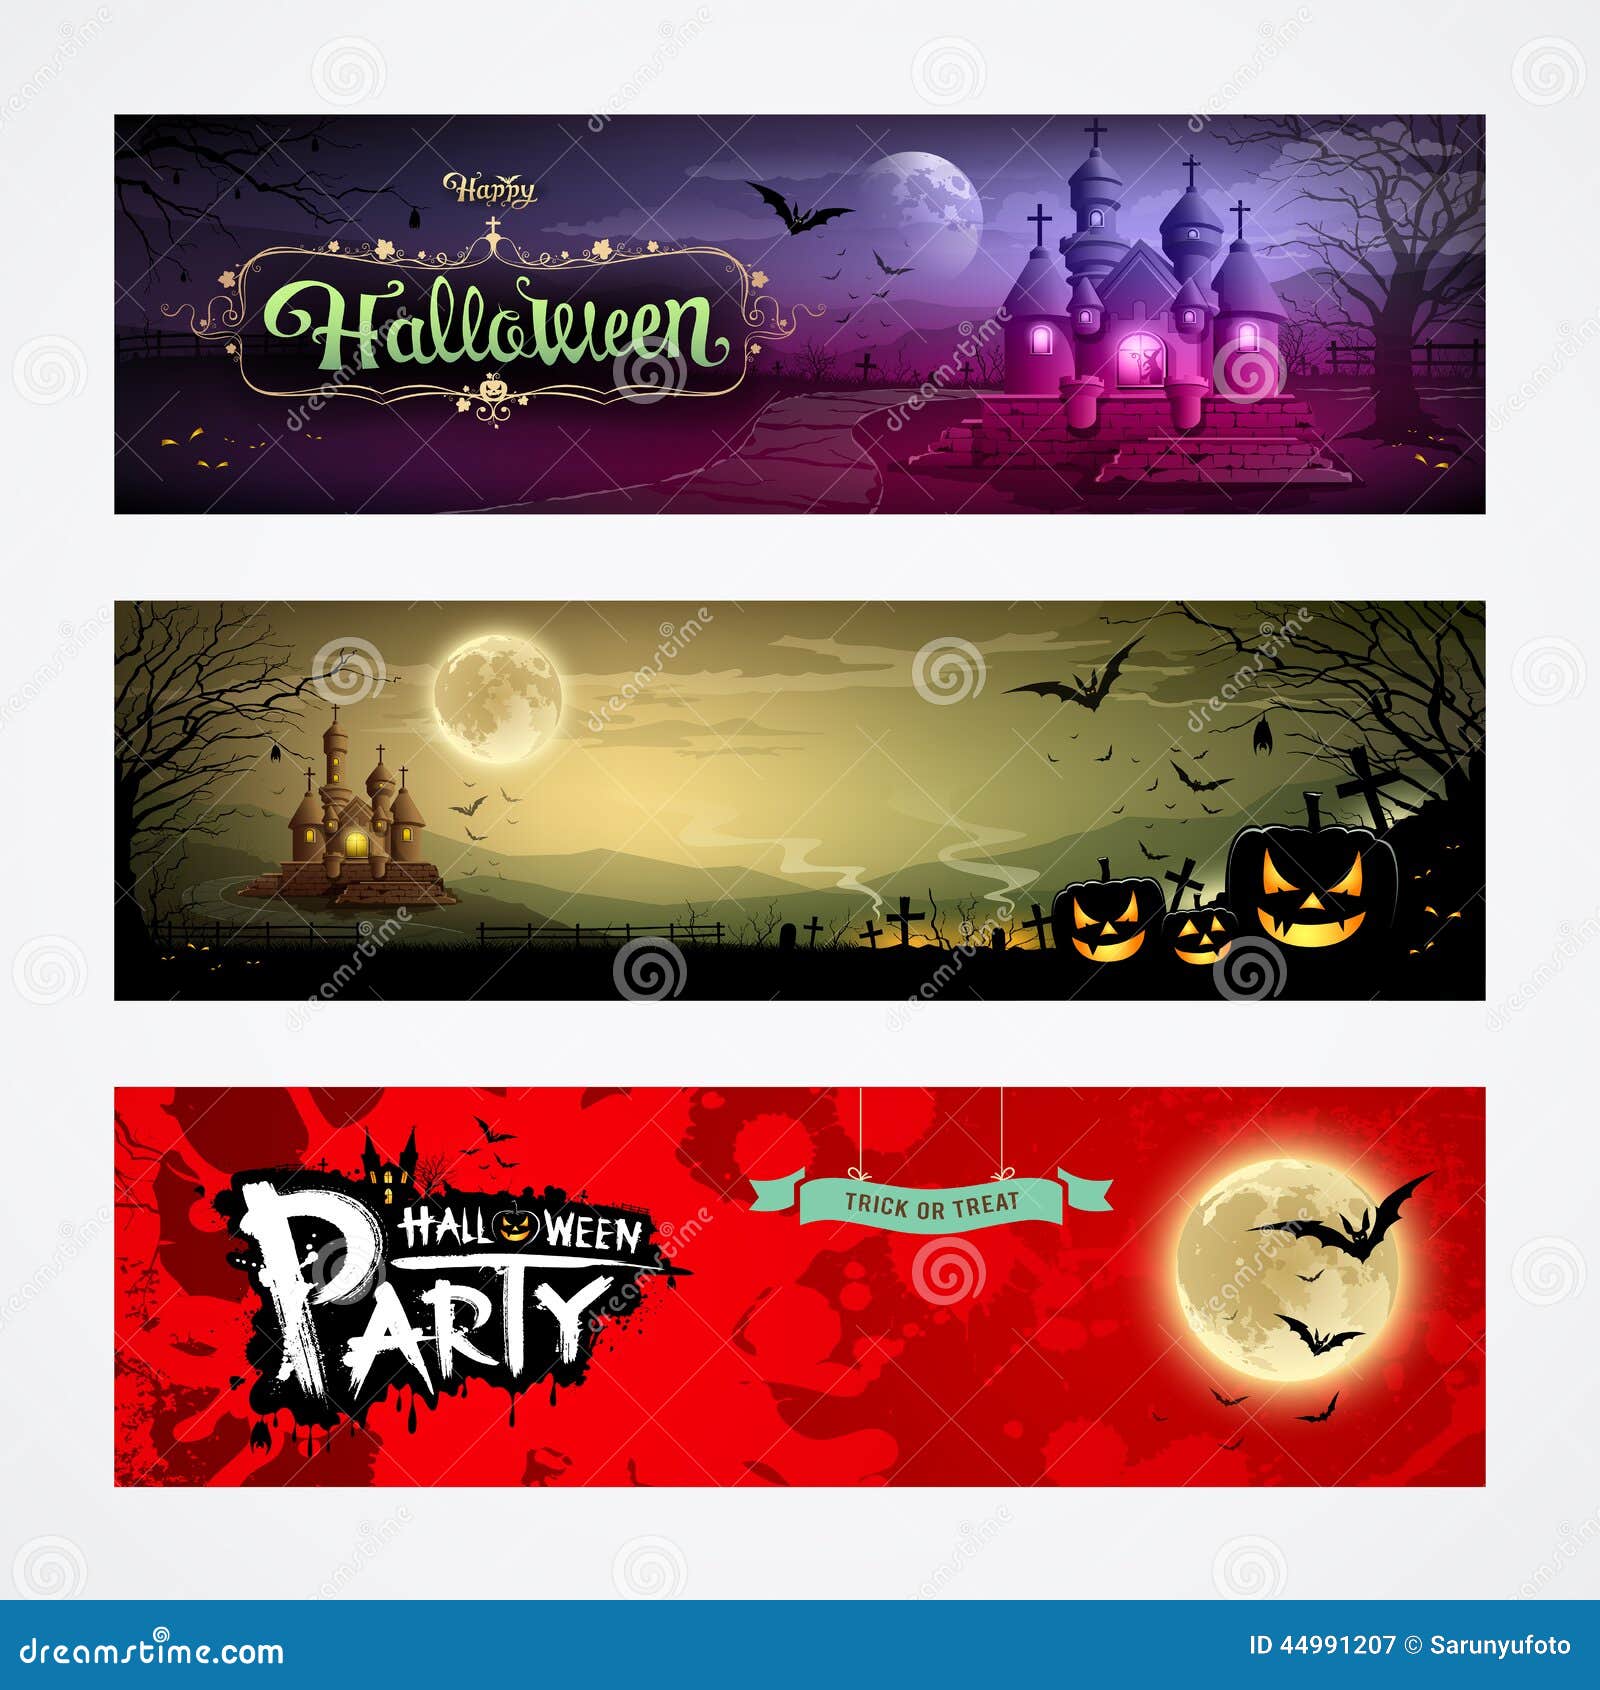 happy halloween collections banners